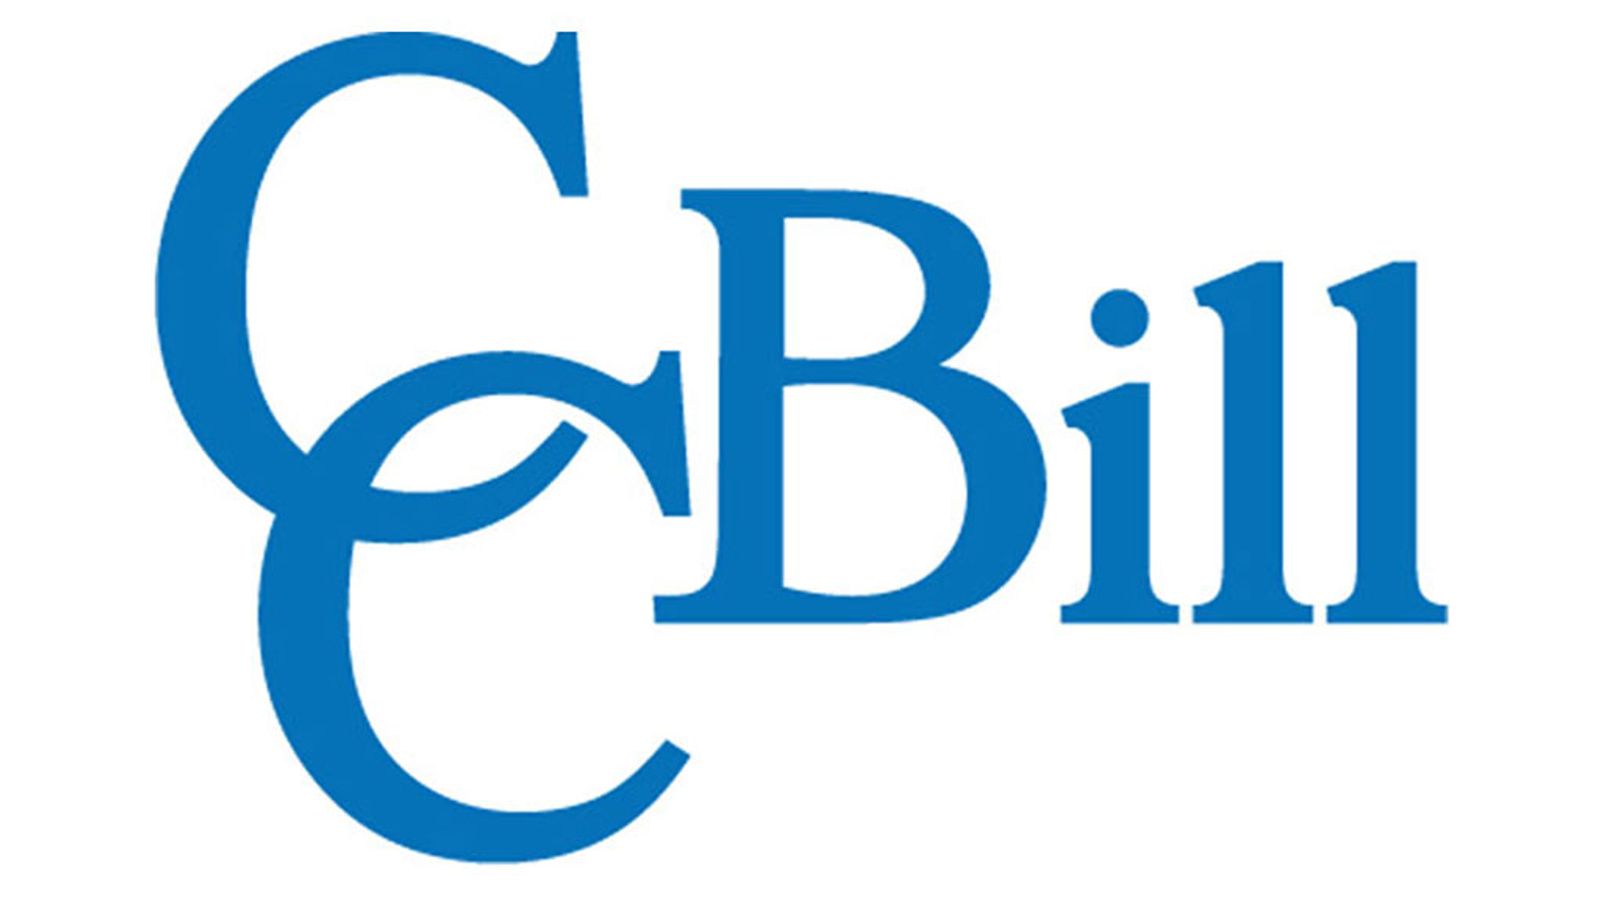 CCBill Partners With Weebly For New Online Payments Service